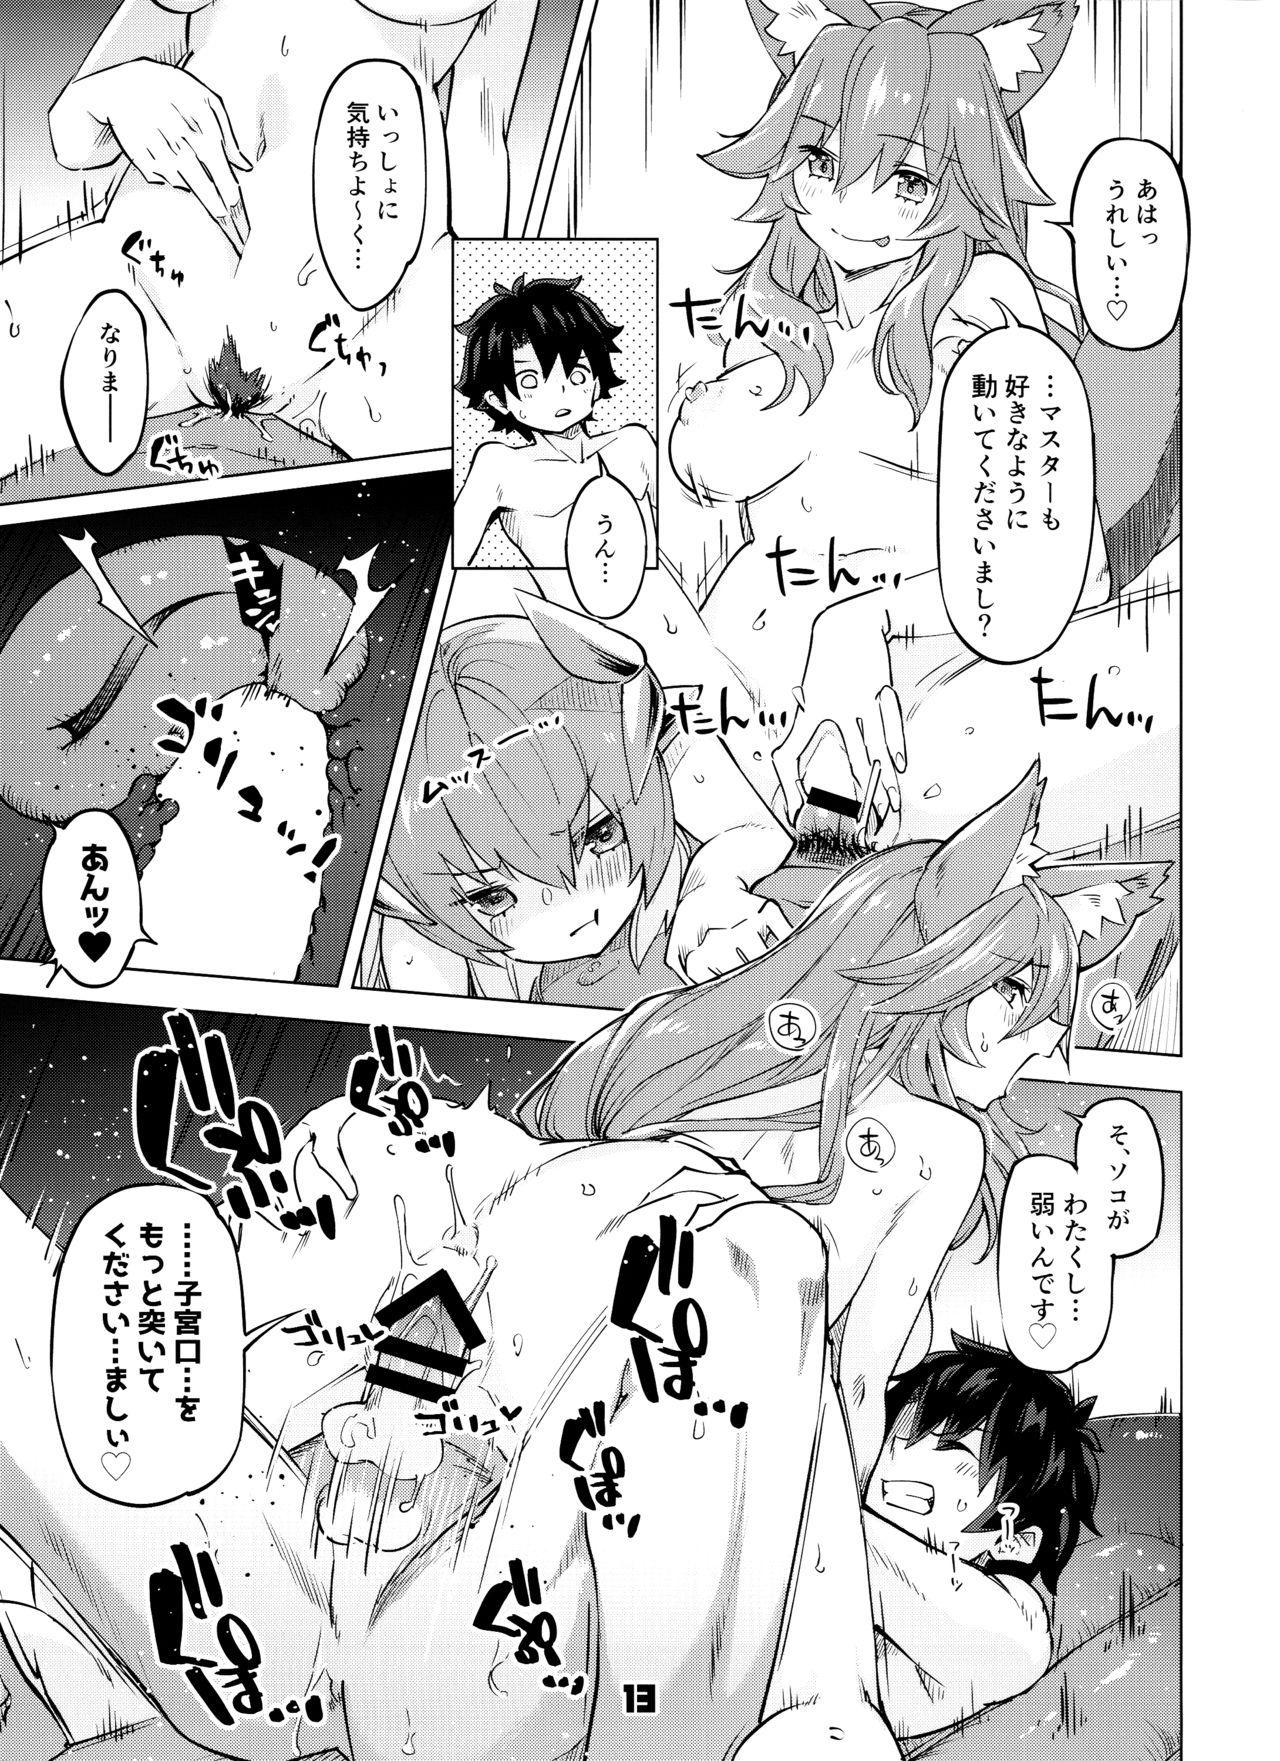 Penis Sex Shinai to Derarenai My Room 2 - My room can not go out - Fate grand order Dominant - Page 12